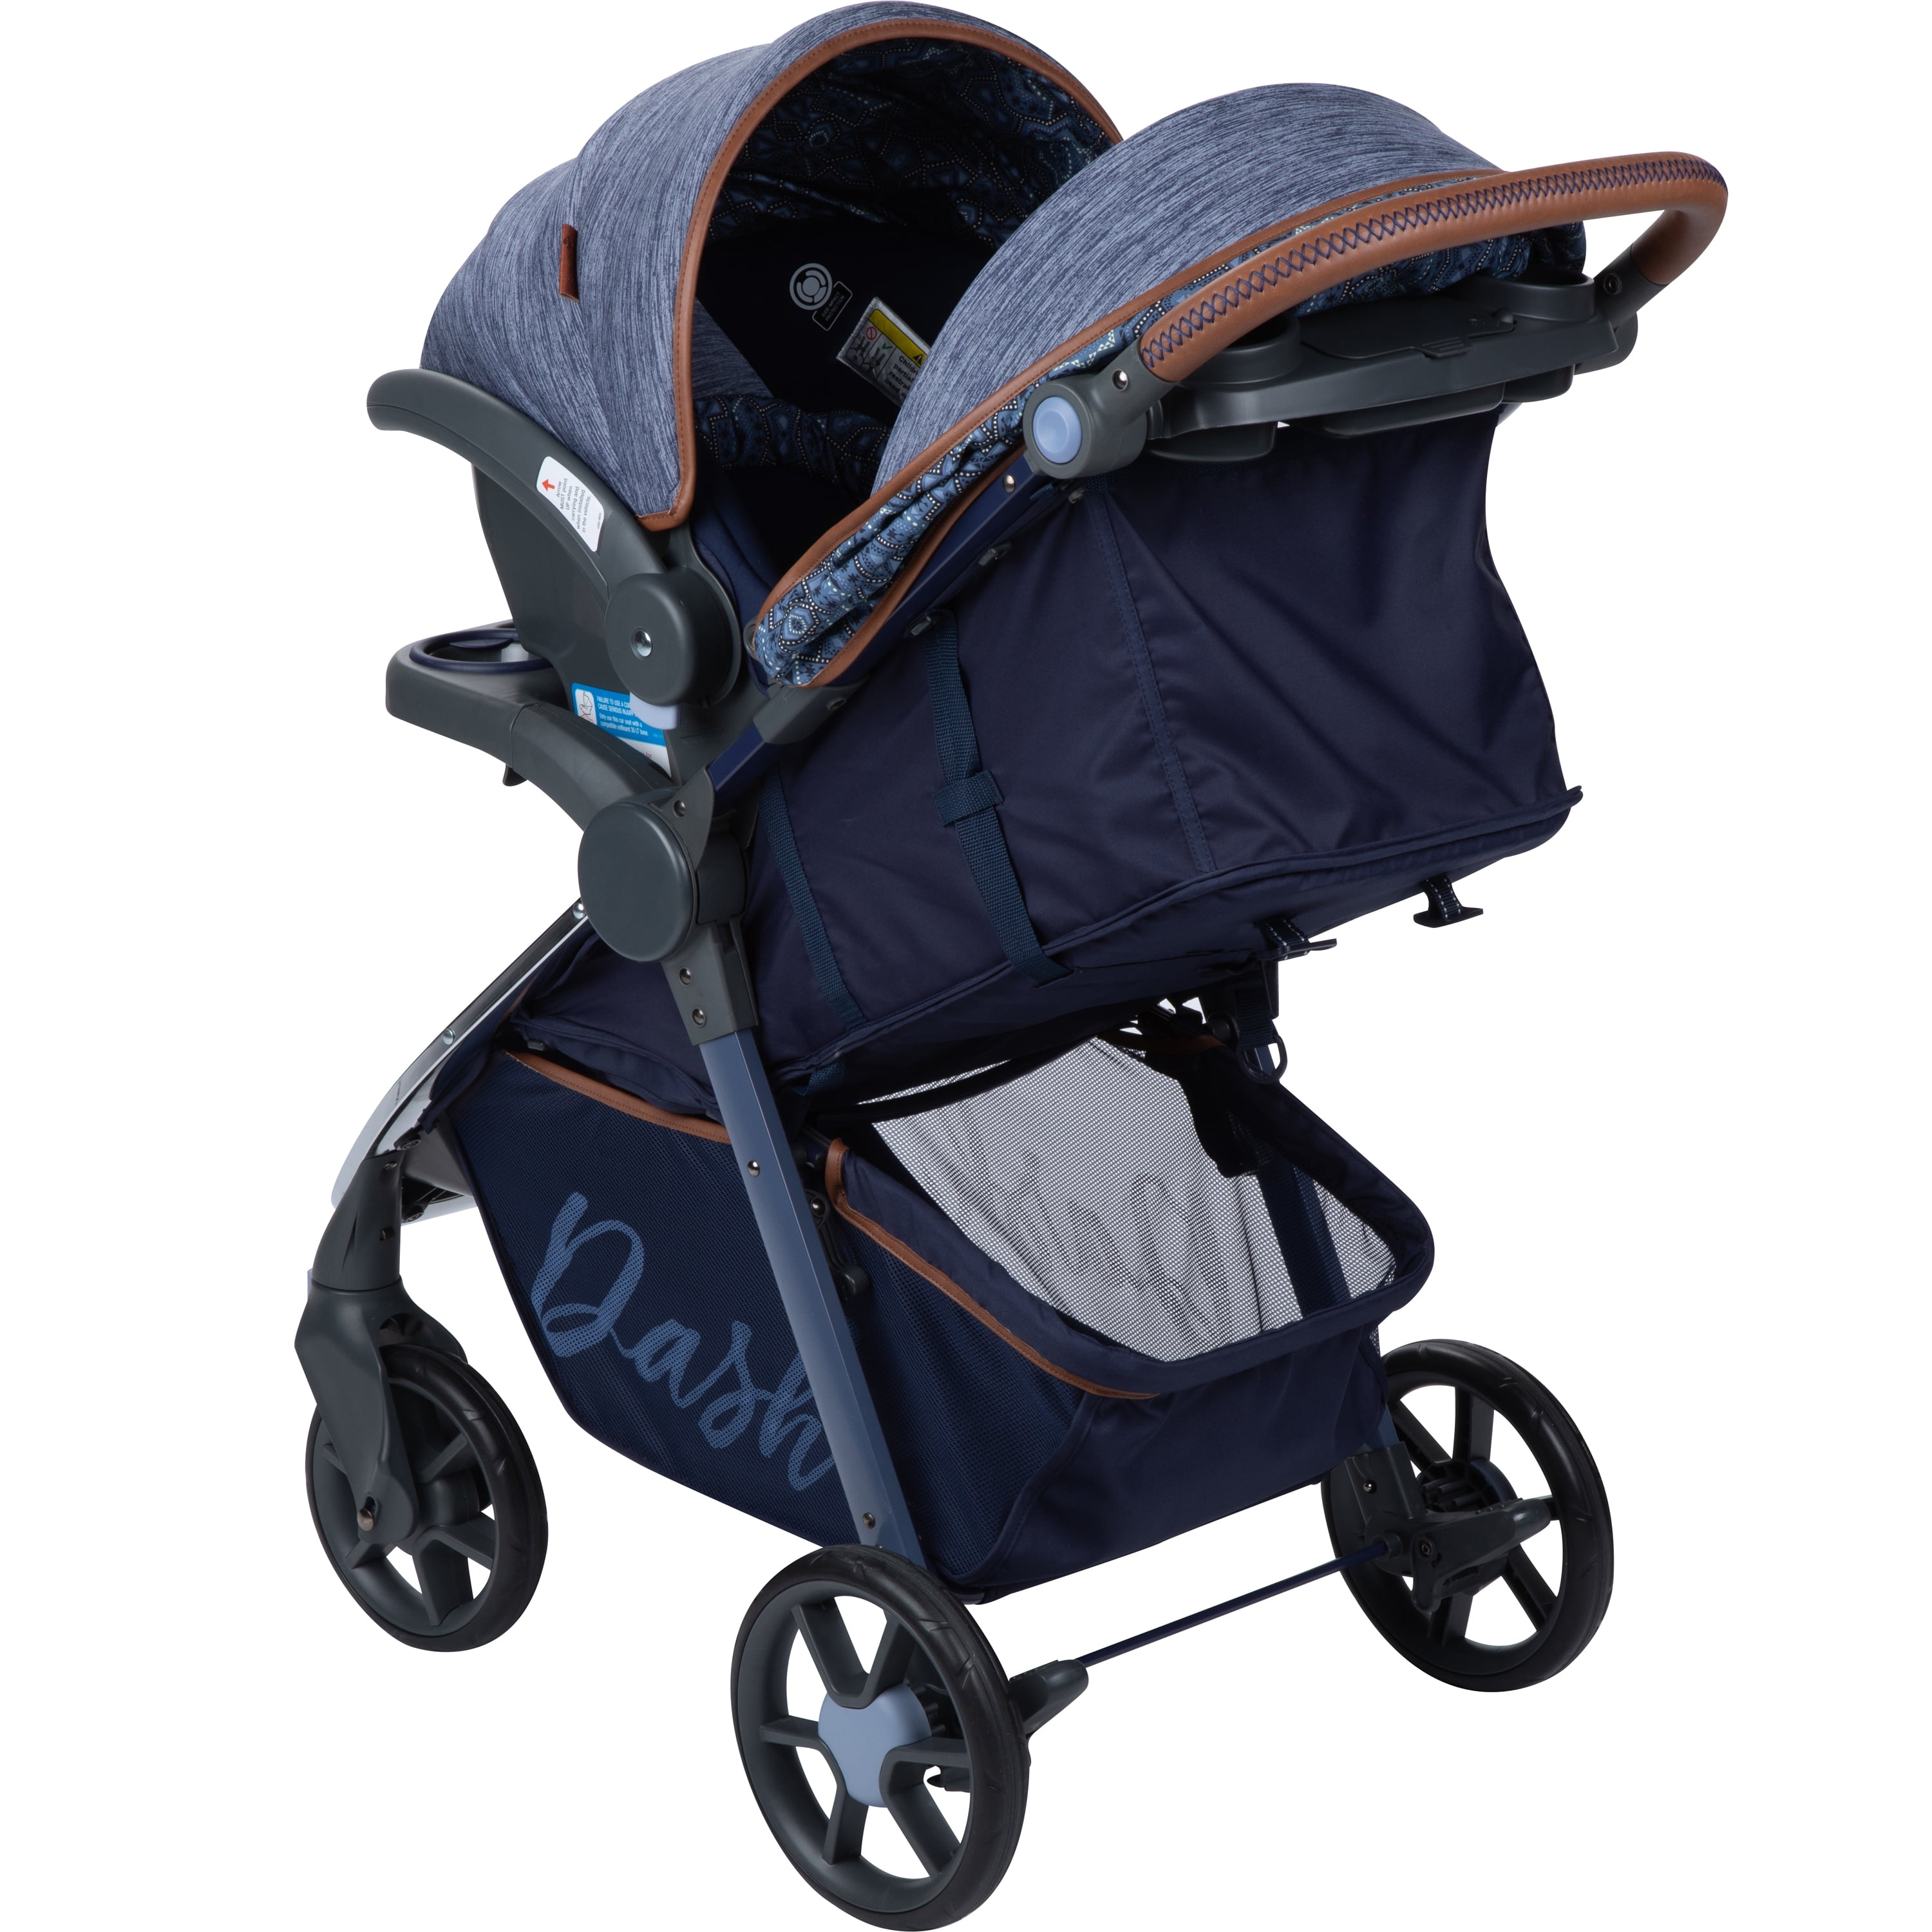 all in one stroller system